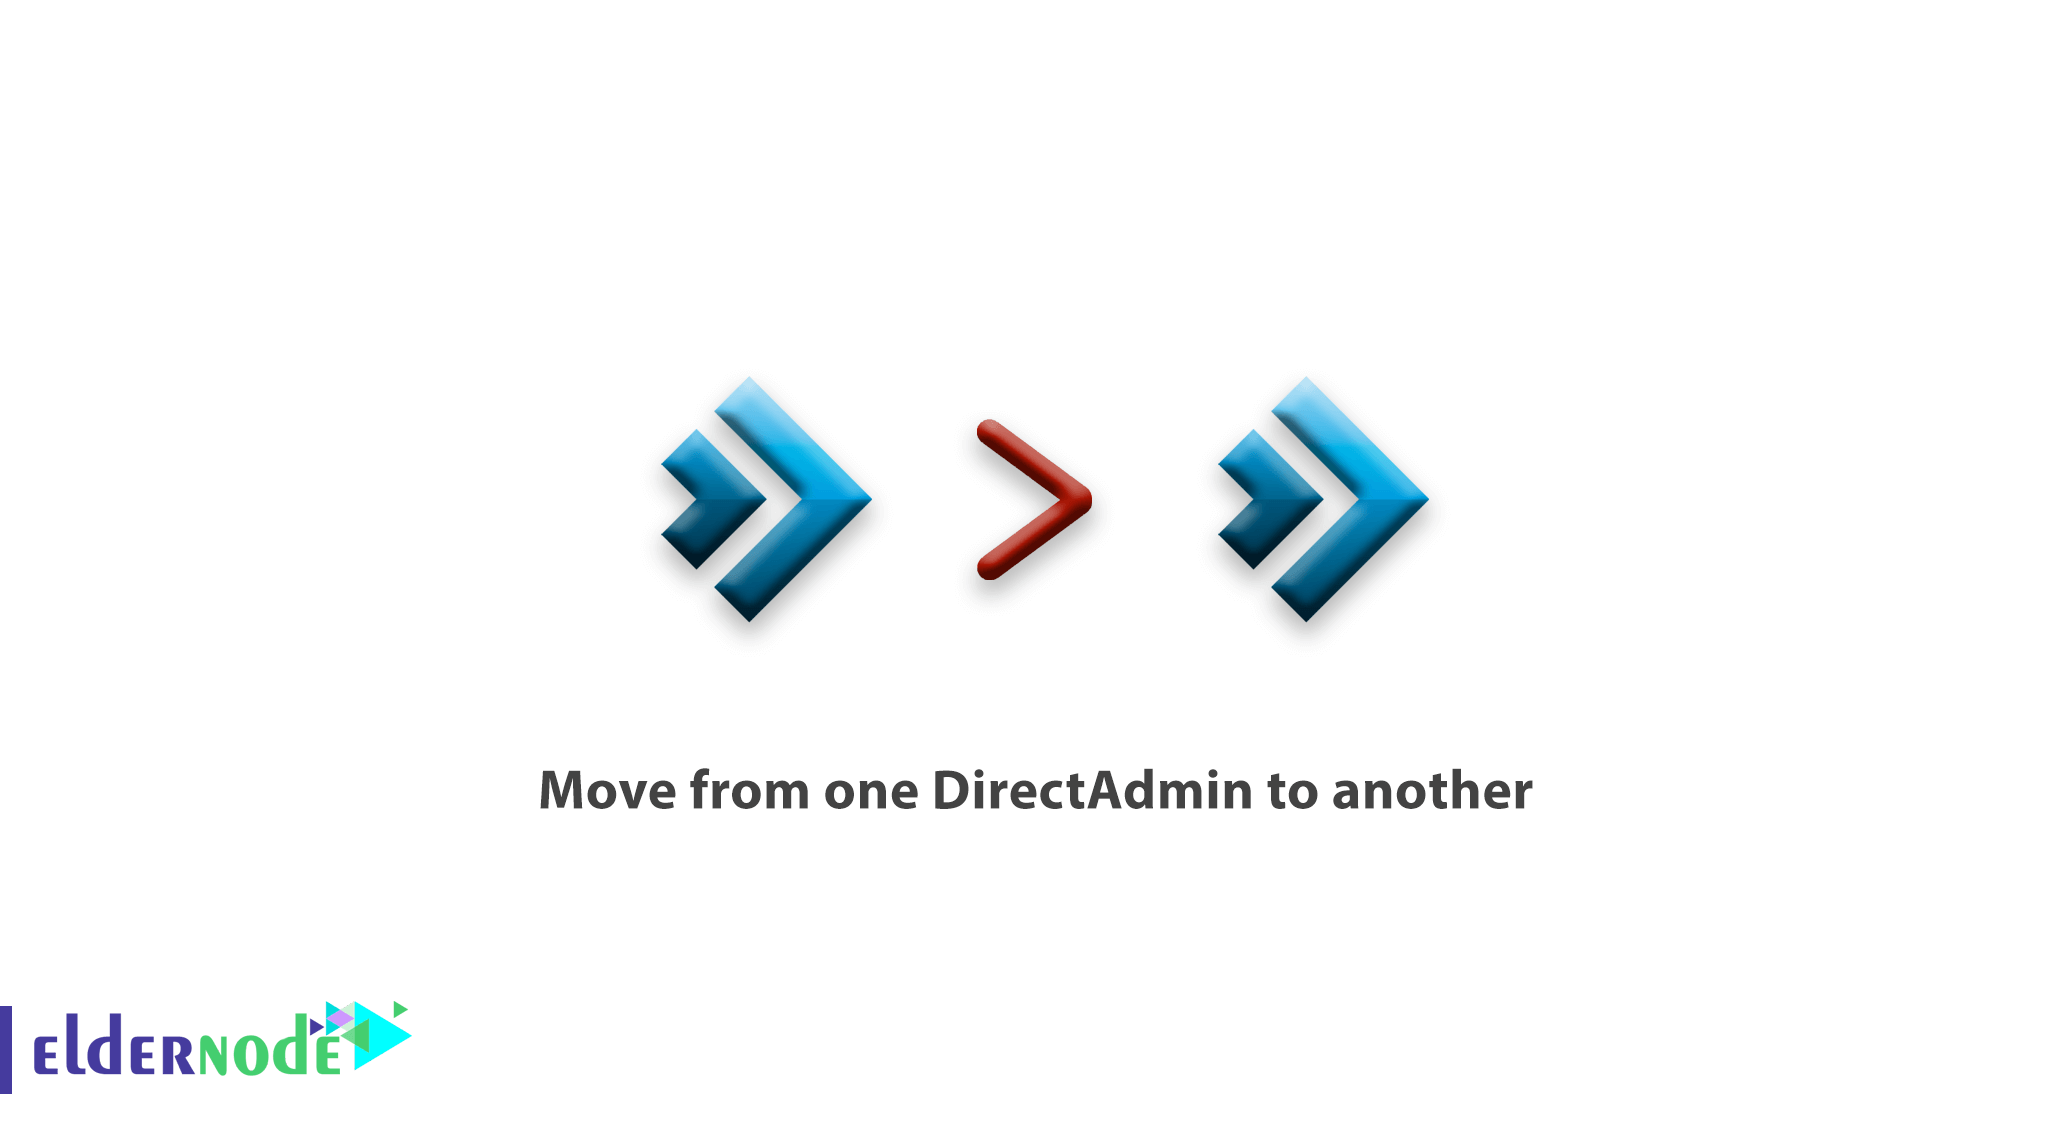 How to move from one DirectAdmin to another